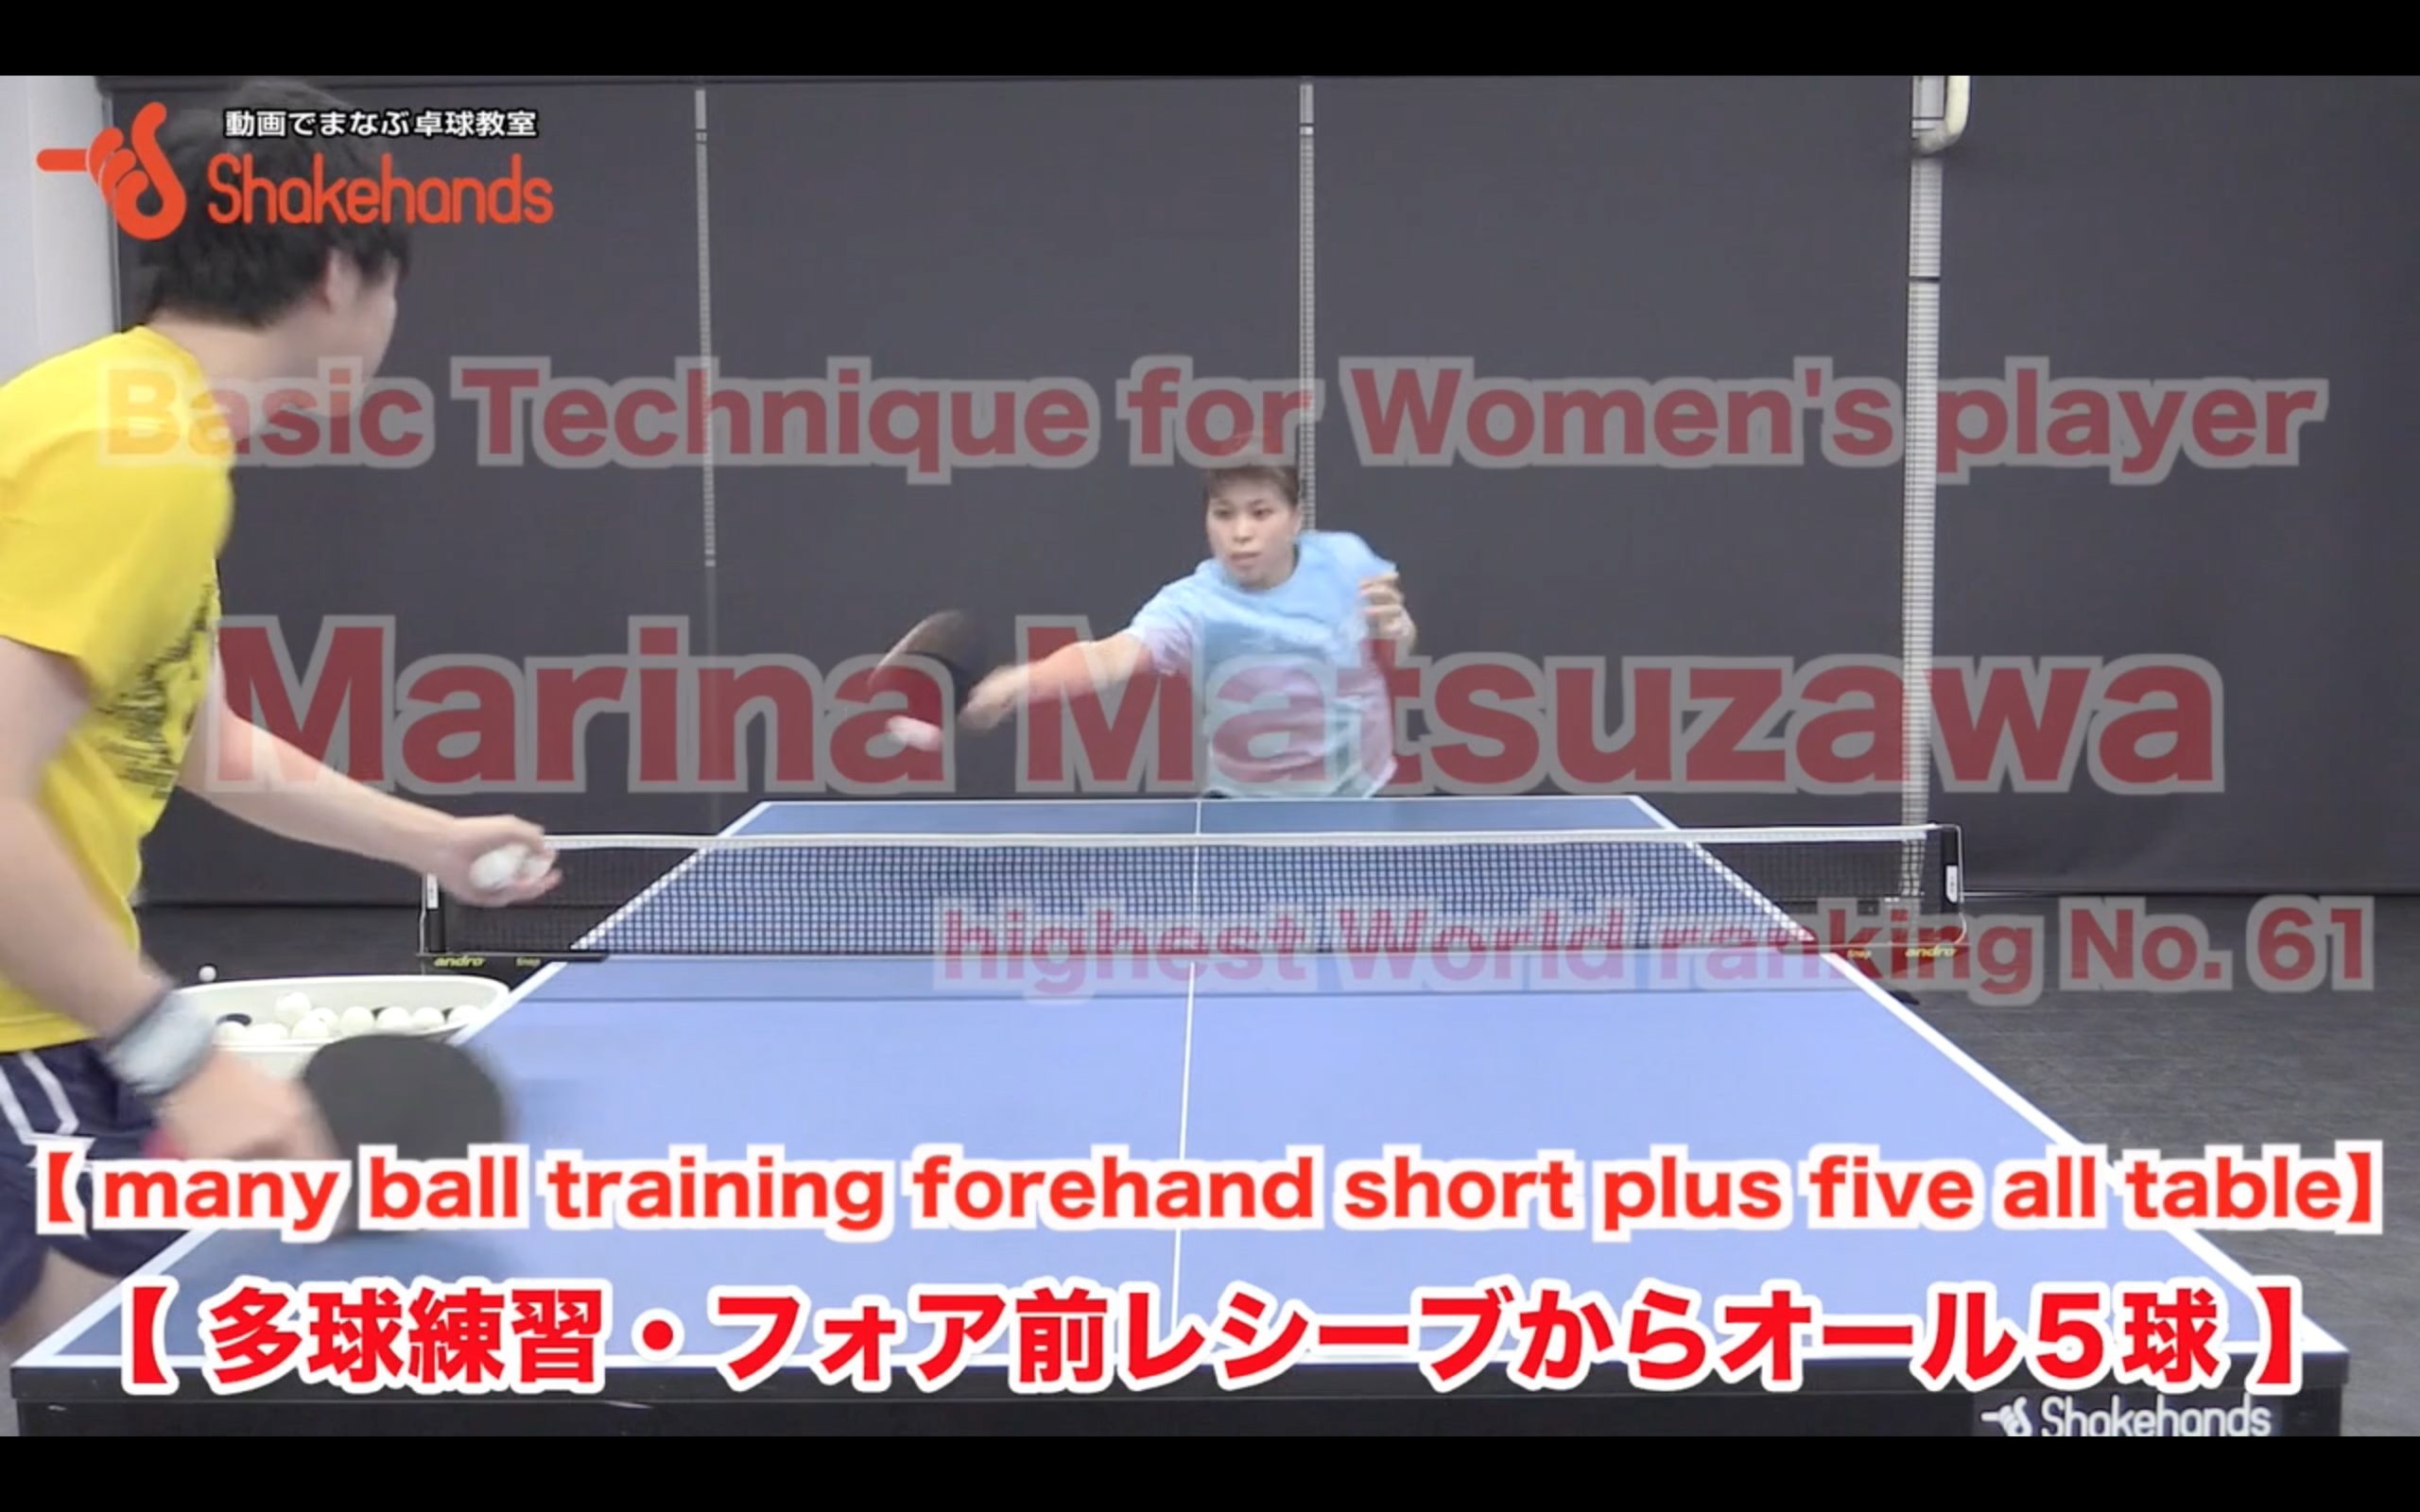 Many ball training, forehand short plus five ball all table